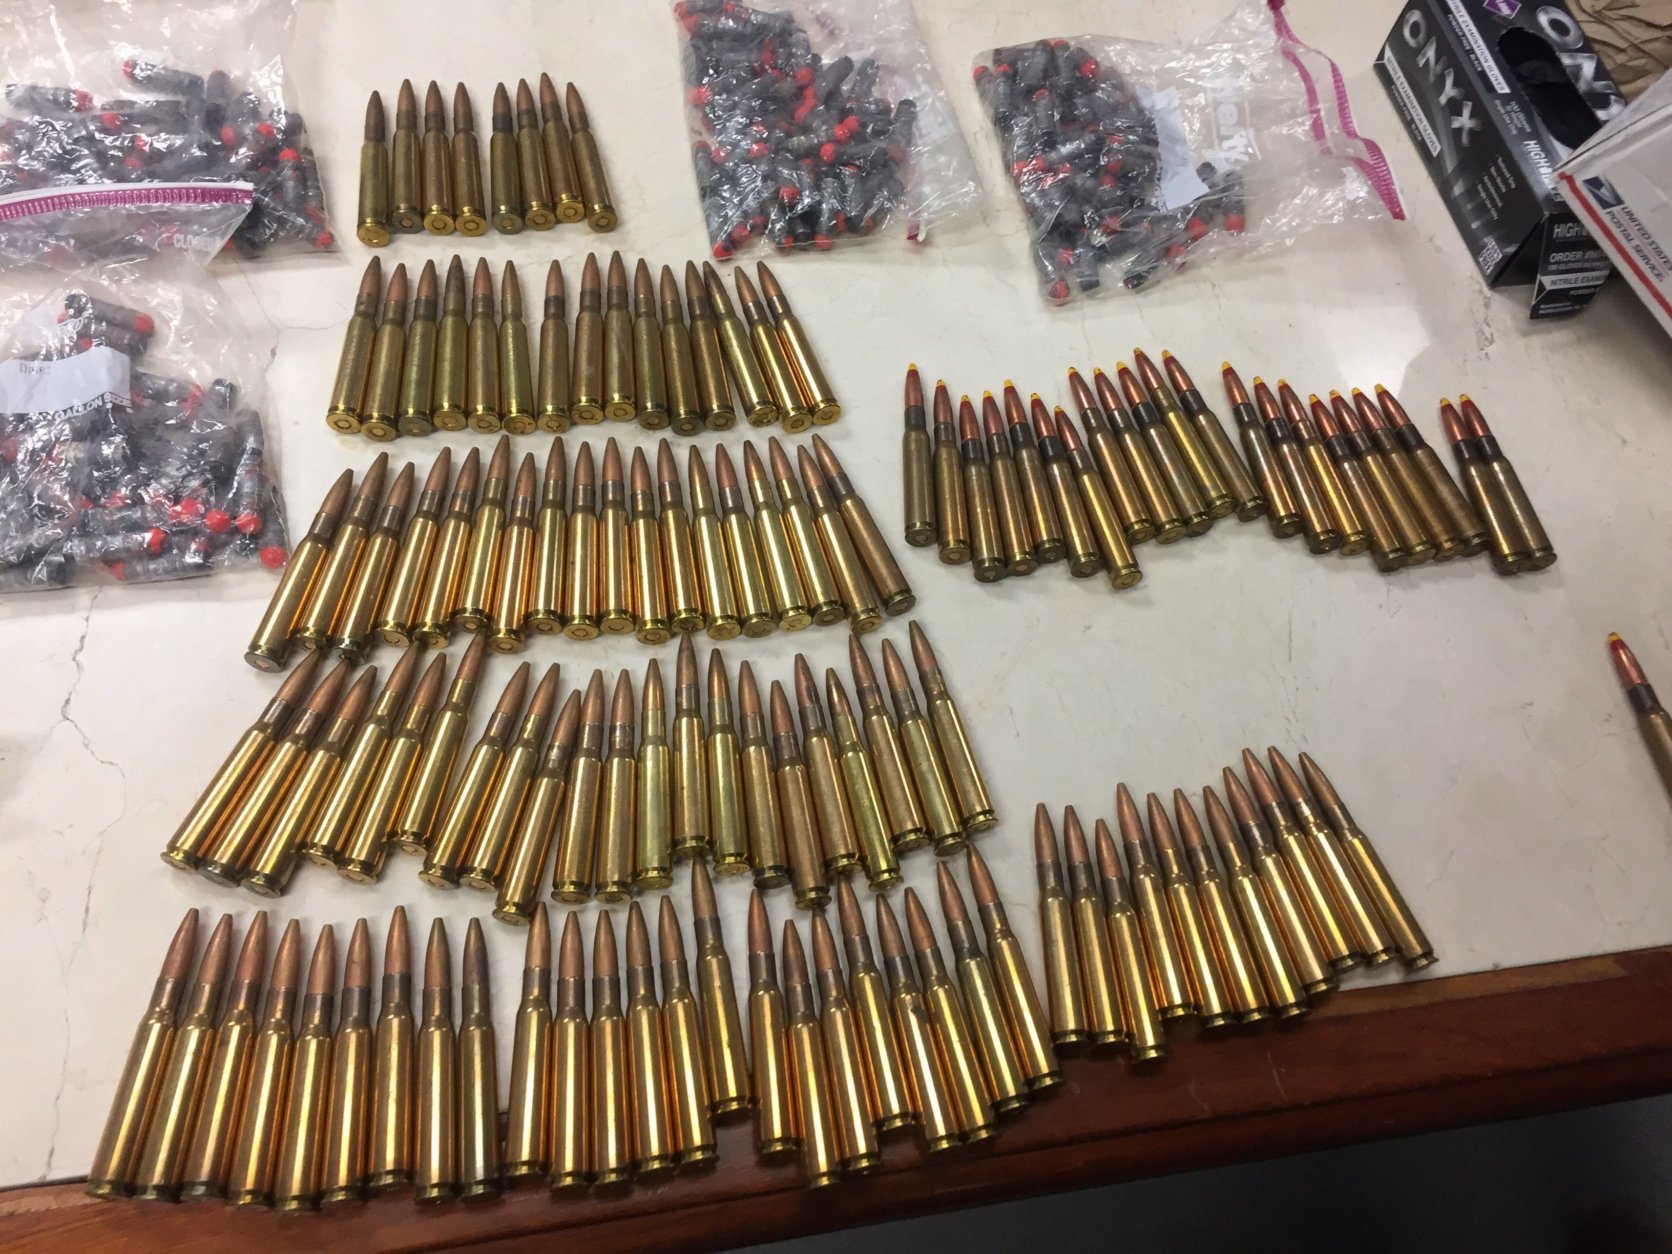 A collection of explosive-tipped ammunition that Bailey had stored in his bunker. (Photo courtesy of U.S. Attorney's Office)